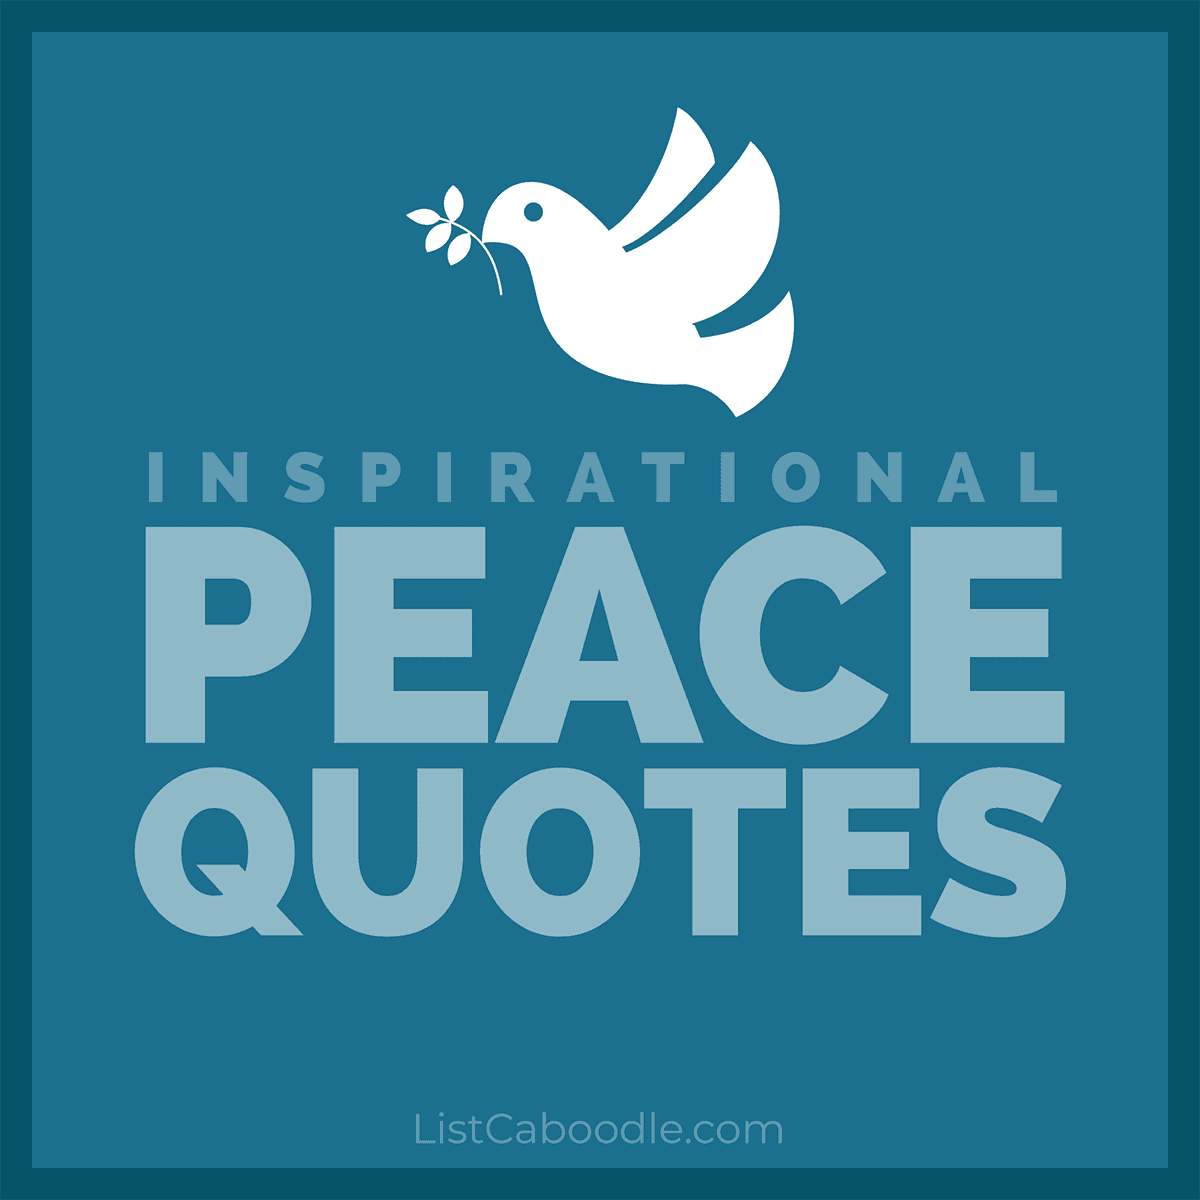 Inspirational peace quotes image